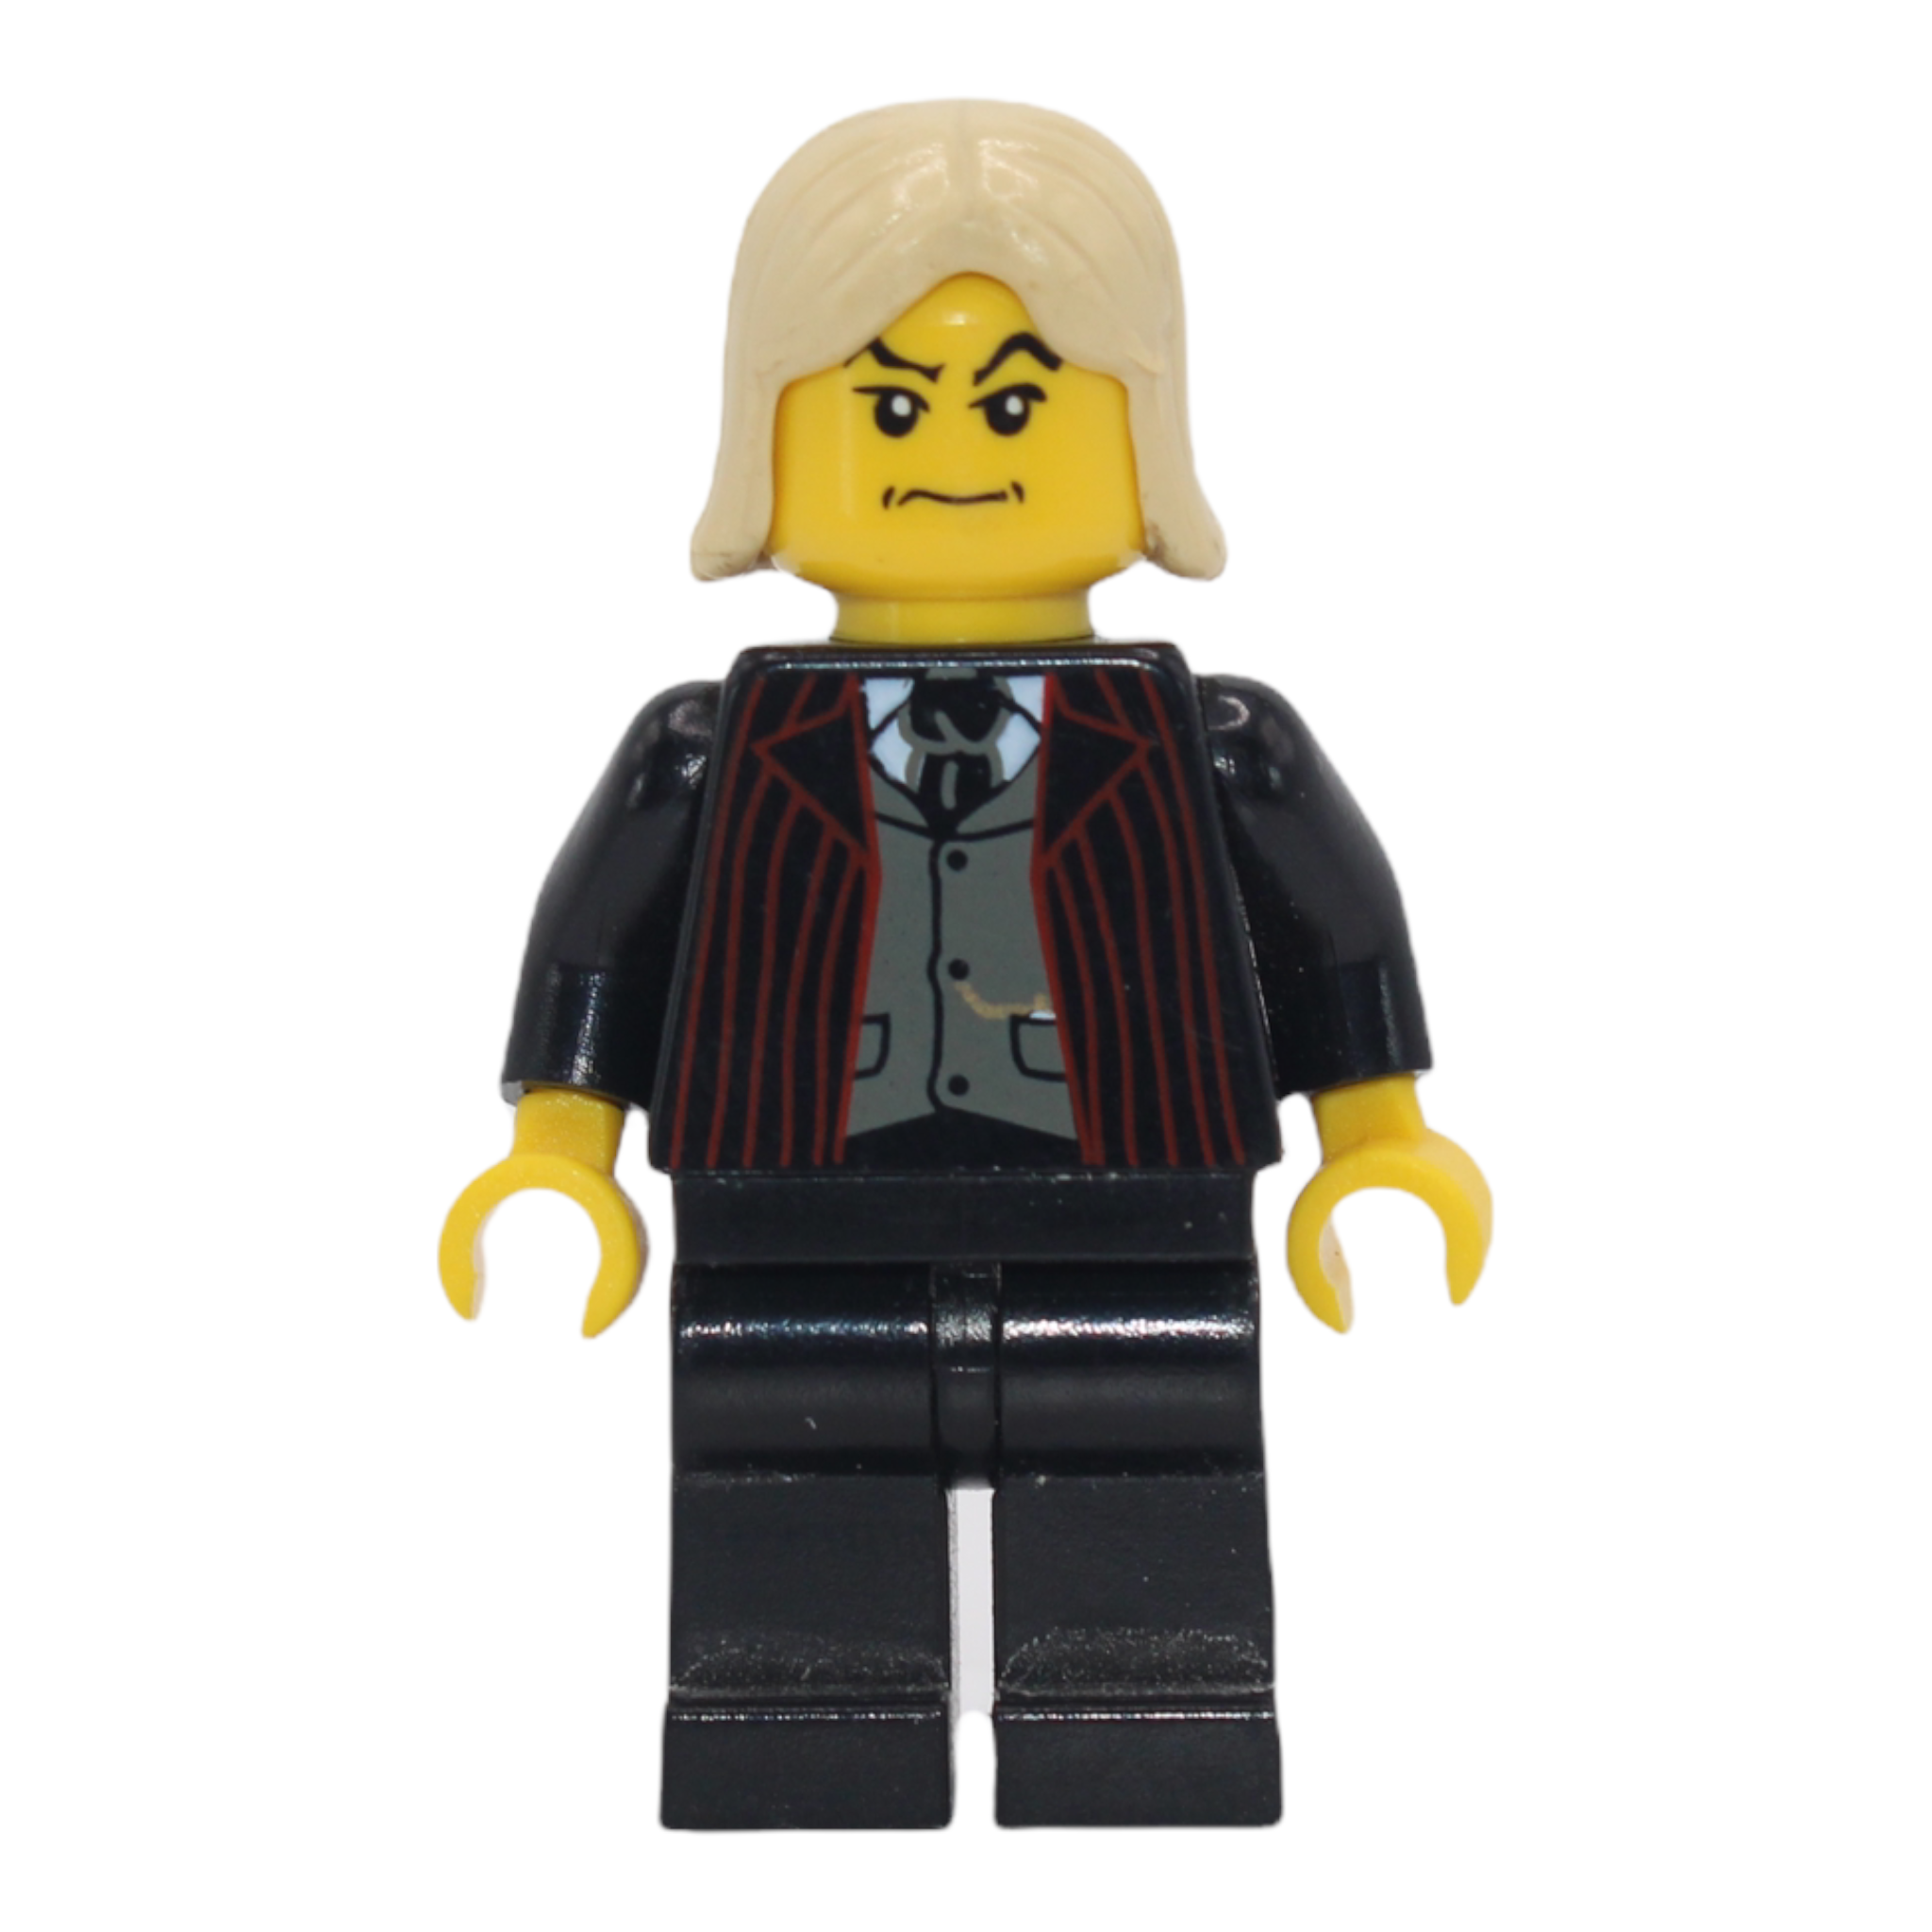 Lucius Malfoy (black suit with red lines, yellow skin)